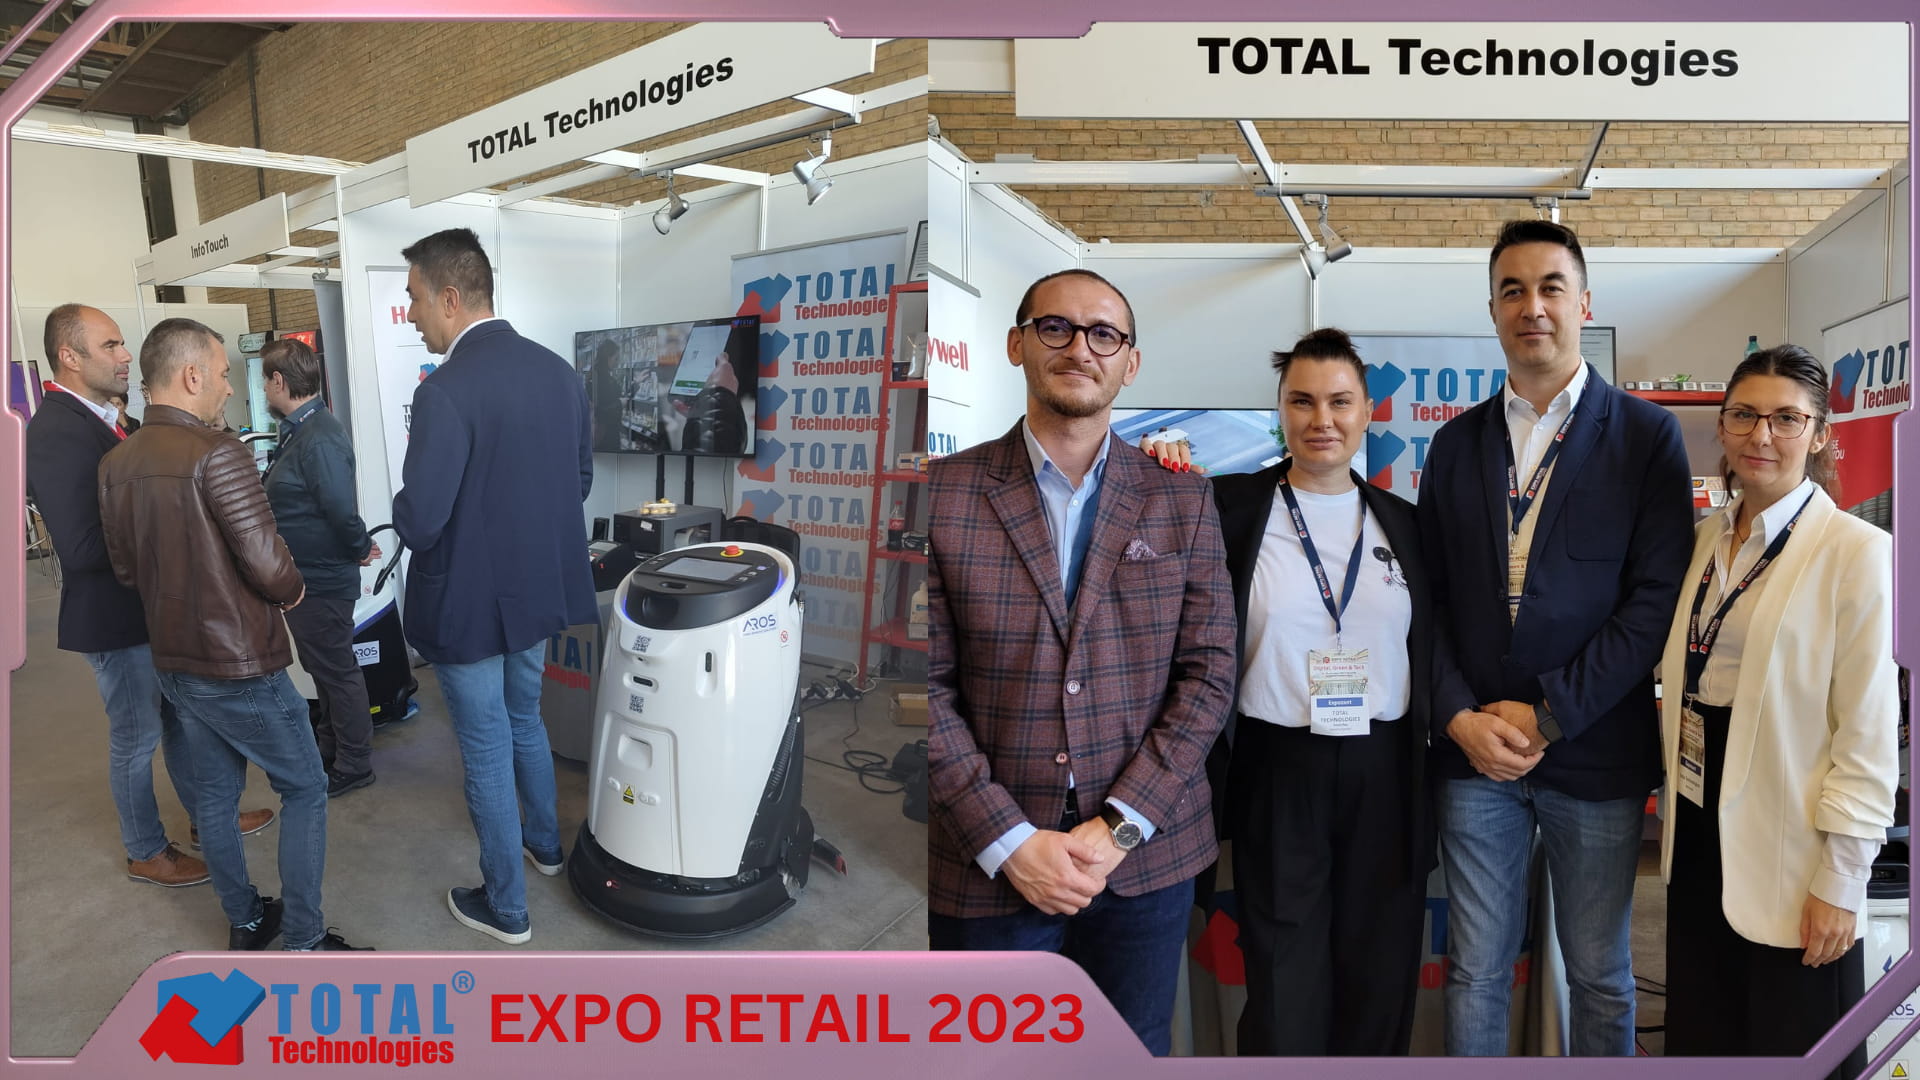 Total Technologies at EXPO RETAIL 2023: Leading innovations in retail